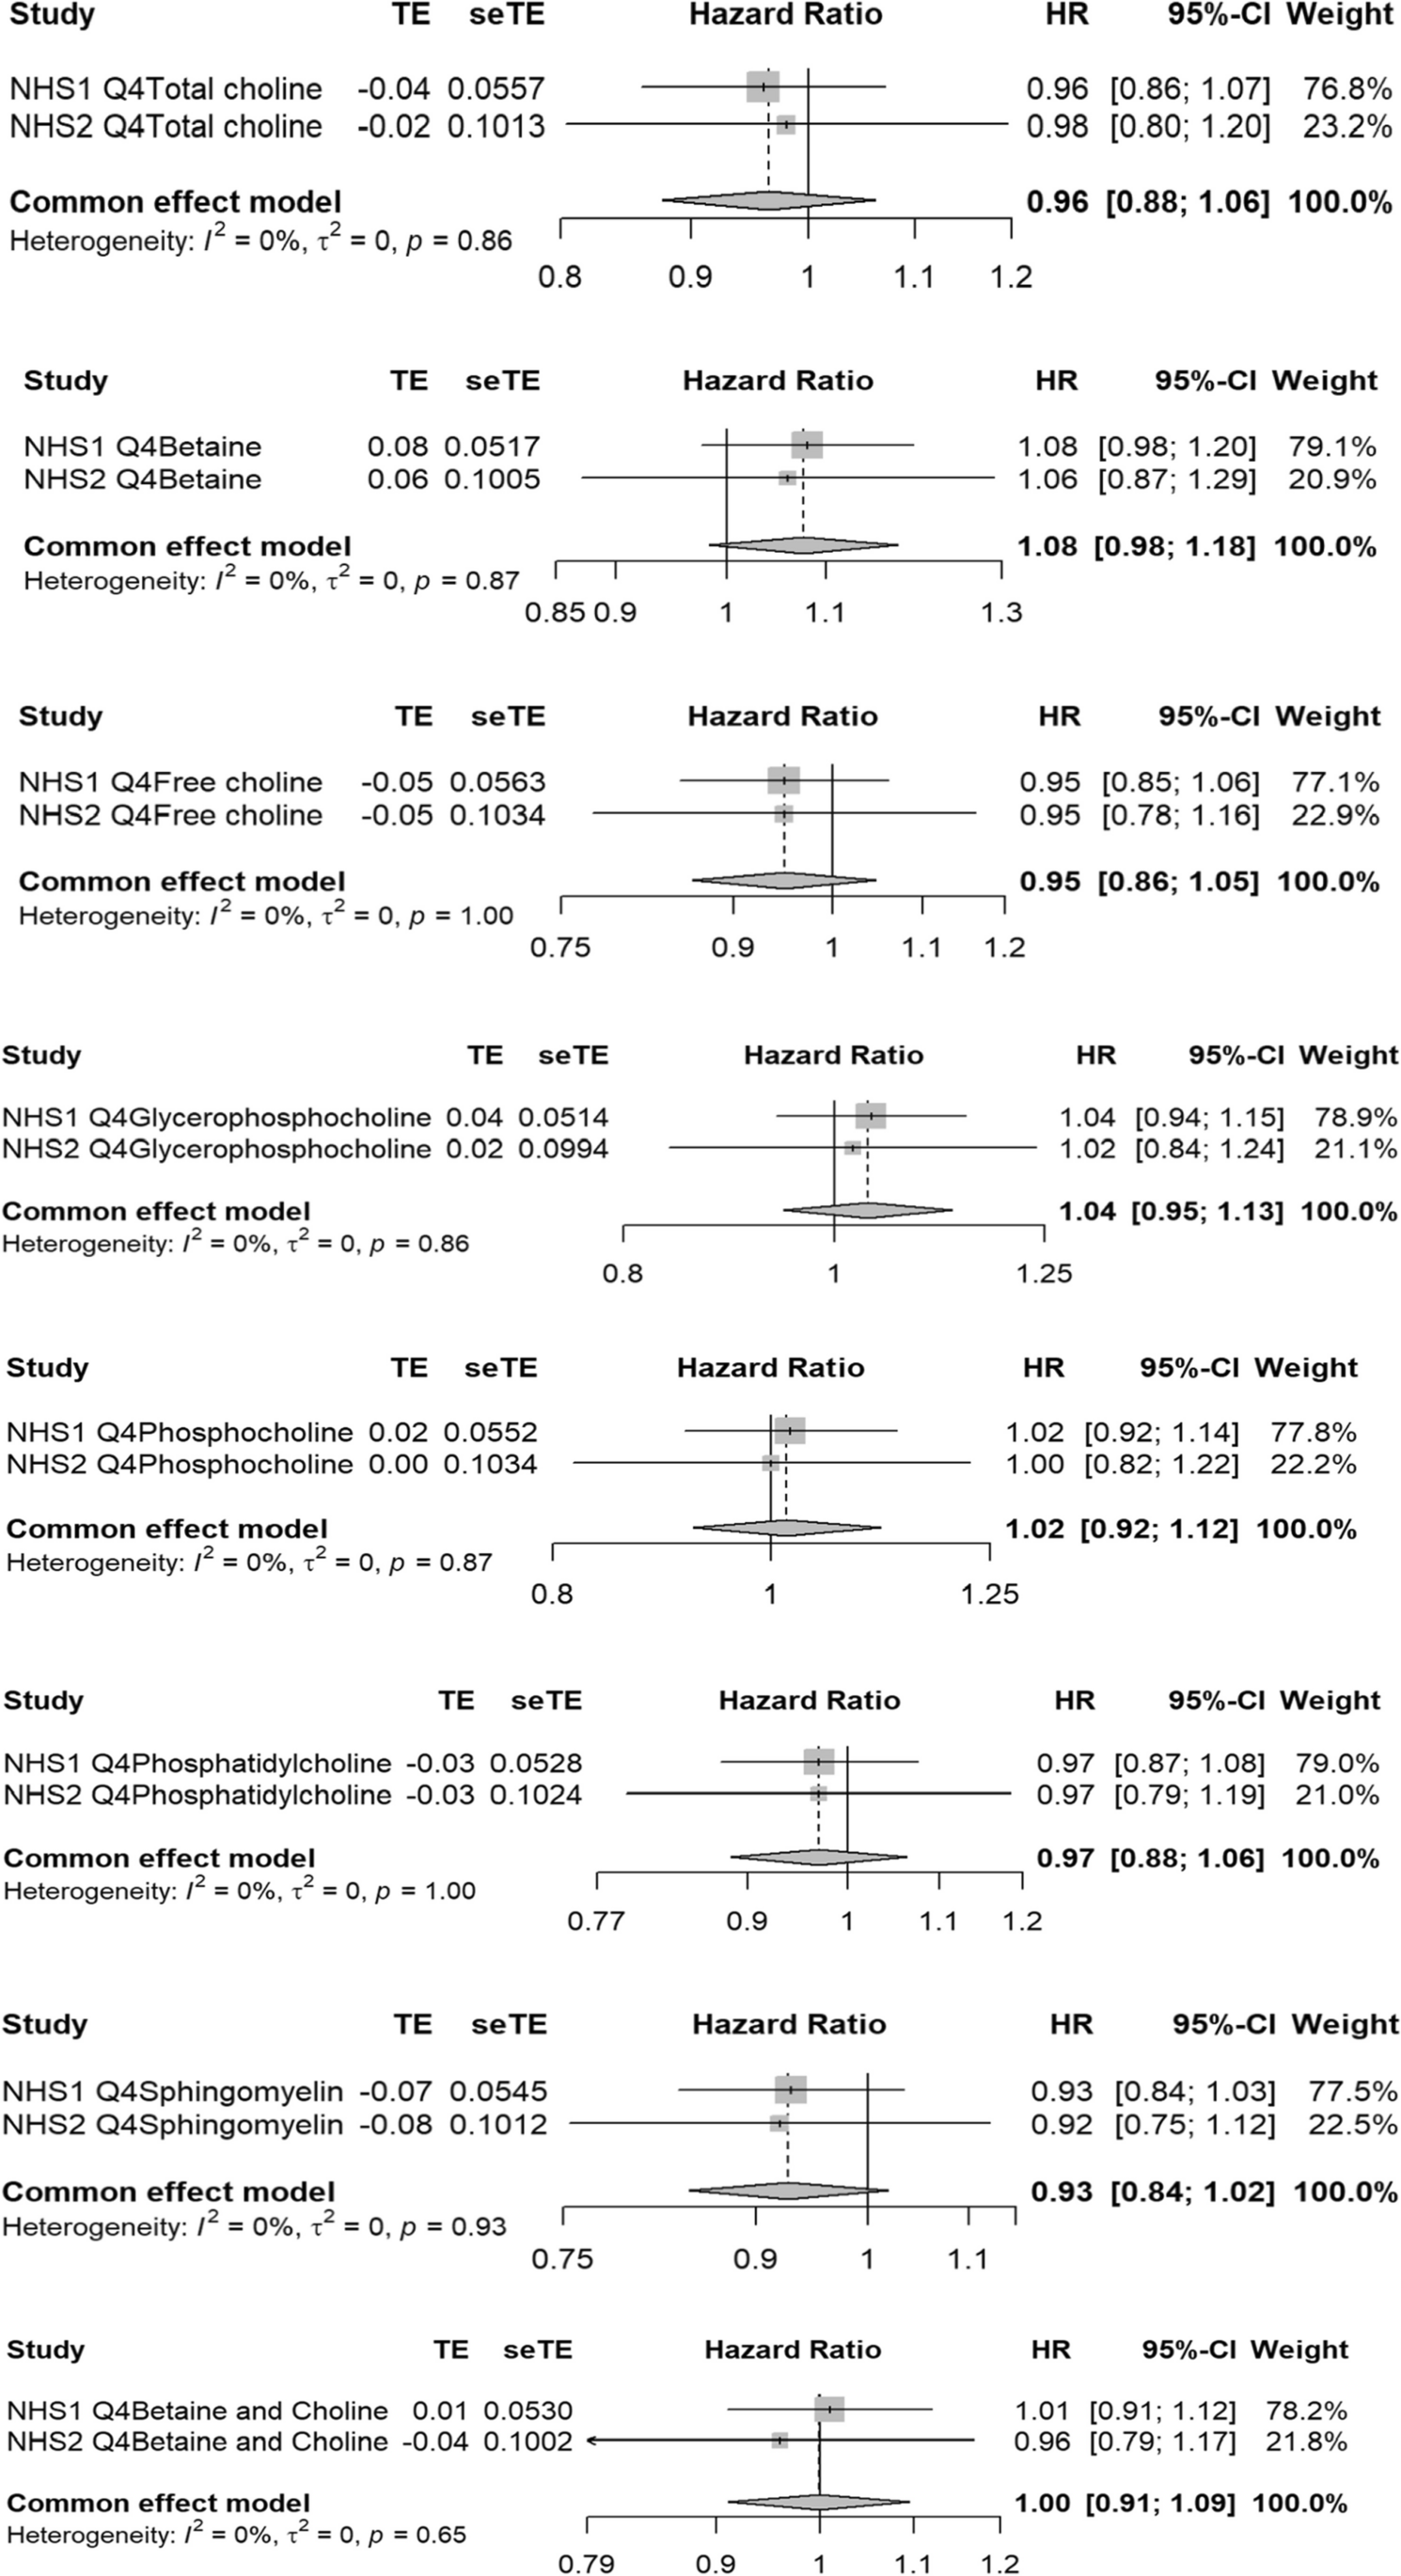 Effect of Dietary Choline Consumption on the Development of Urinary Urgency Incontinence in a Longitudinal Cohort of Women